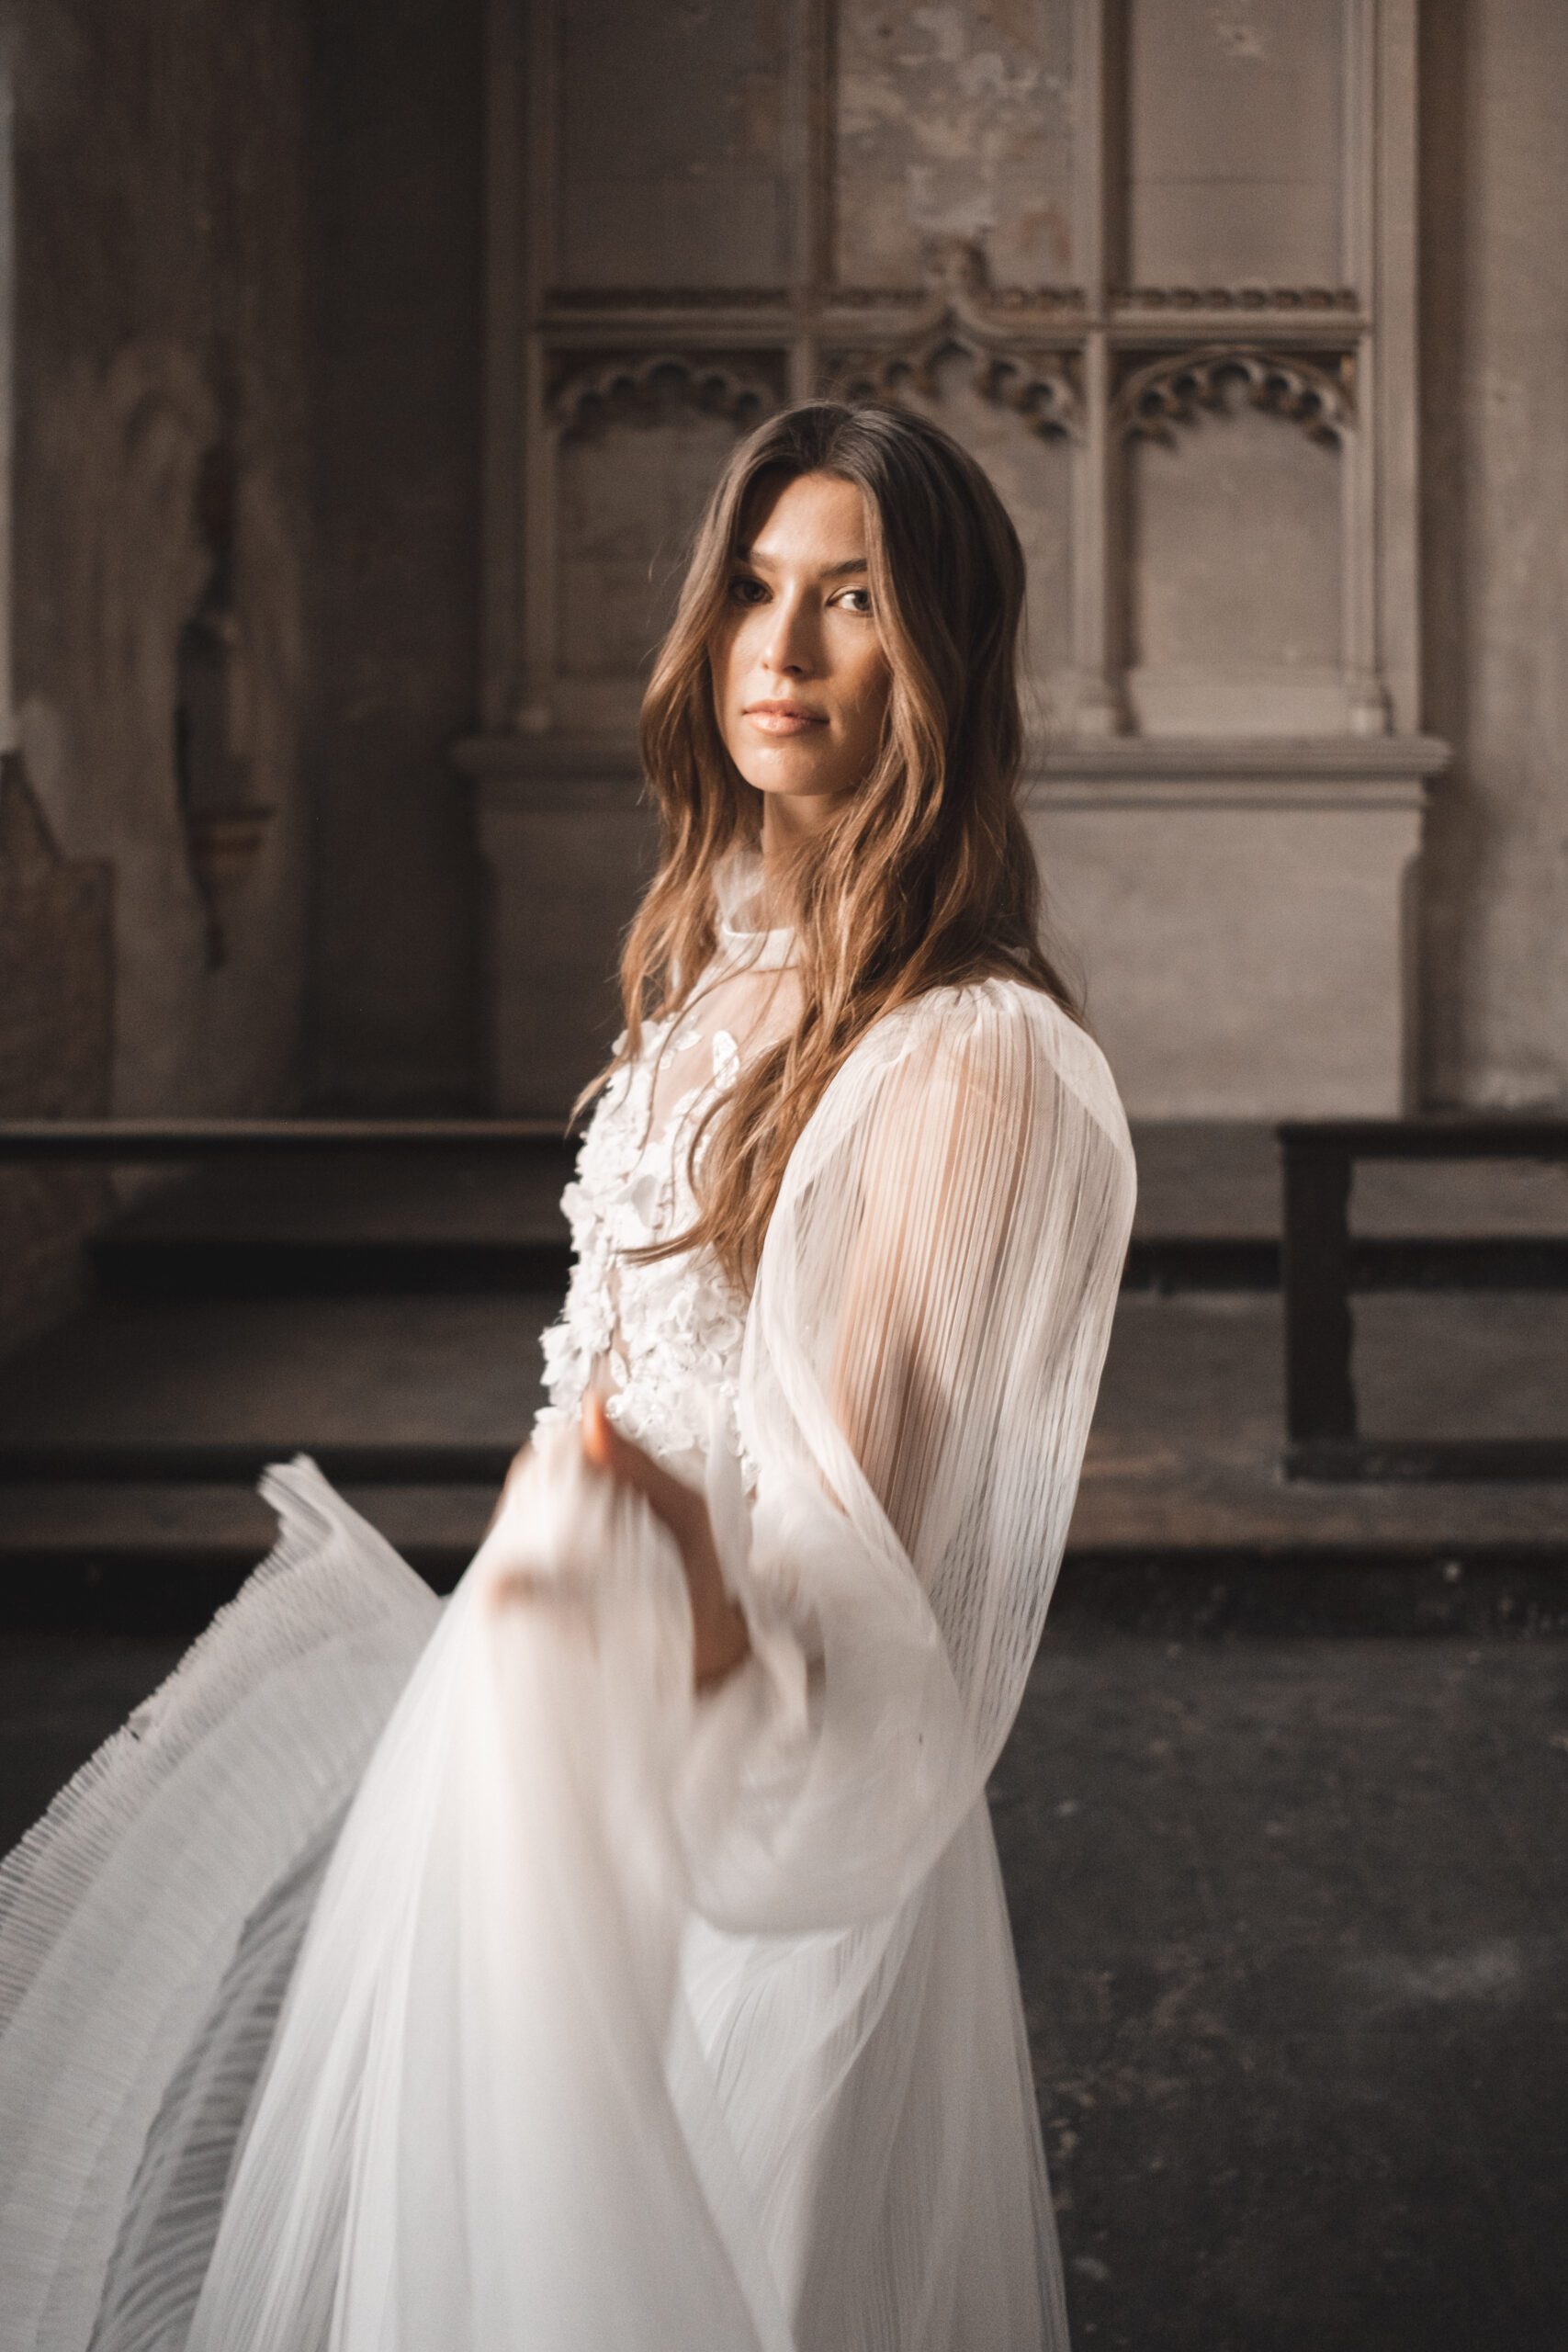 Bridal editorial styled shoot at the Heritage and Art Centre, London